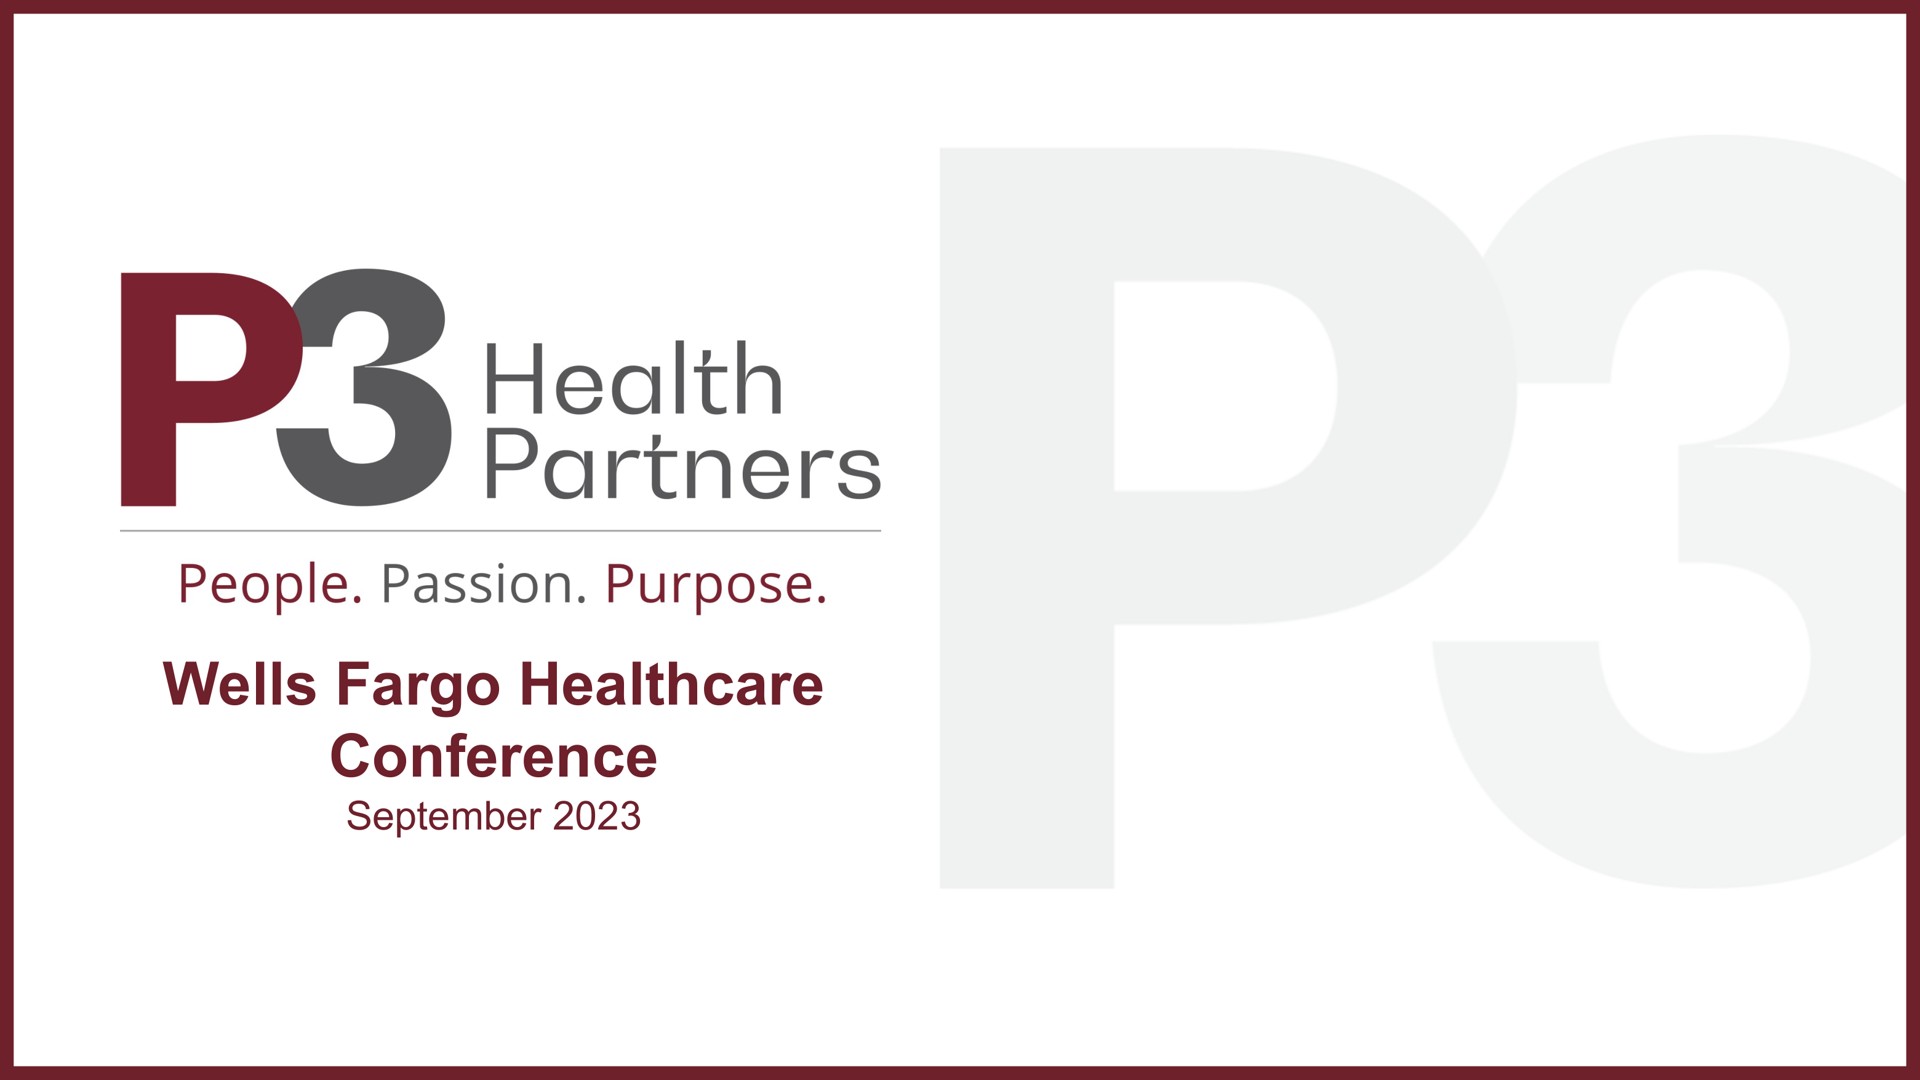 wells conference health partners people passion purpose | P3 Health Partners